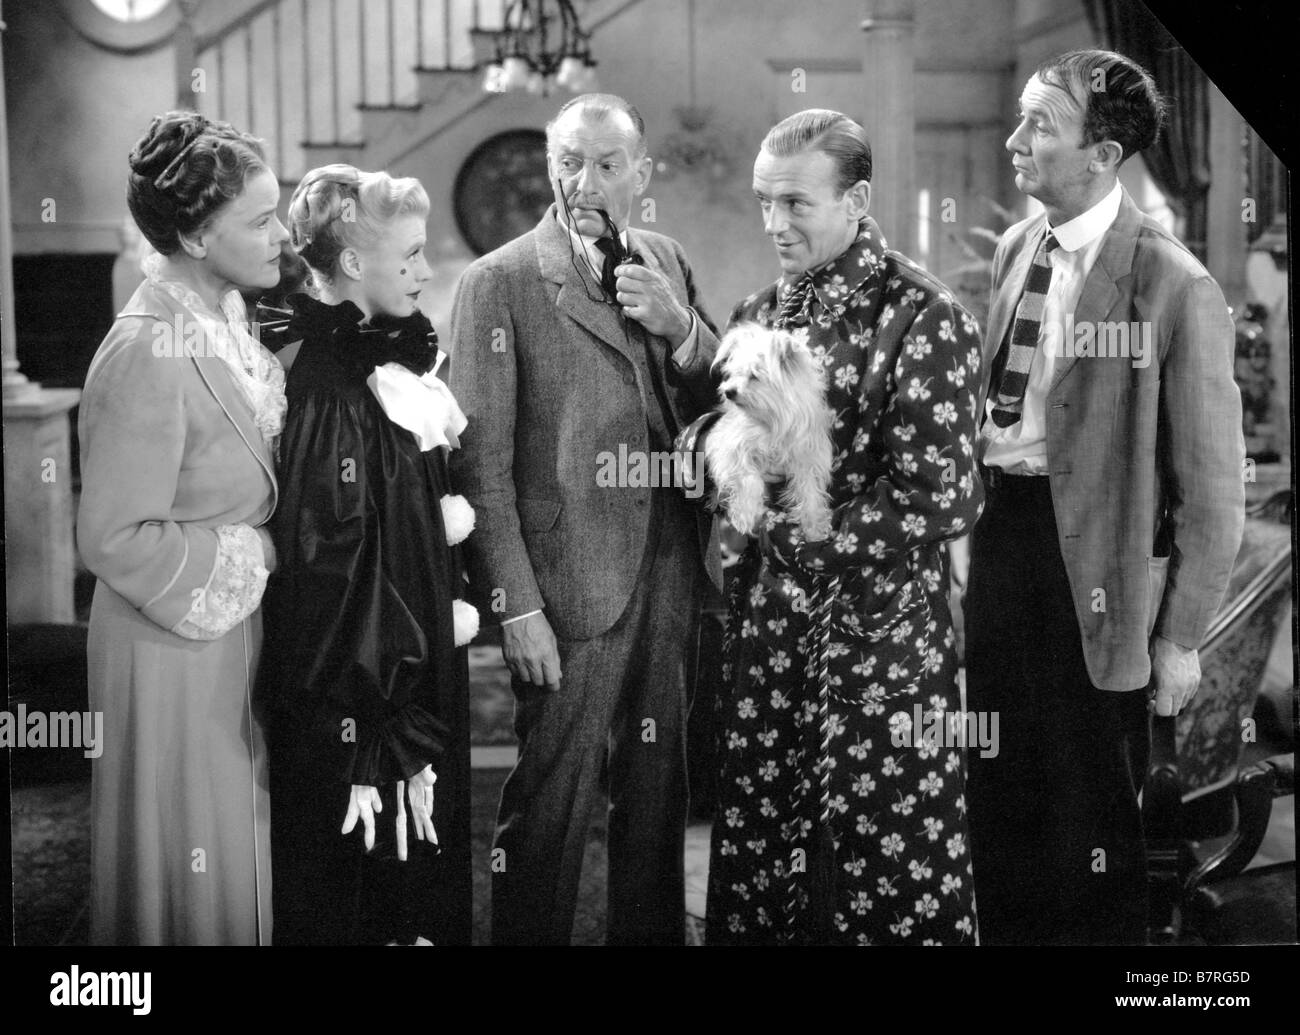 La Grande farandole Story of Vernon and Irene Castle, The  Year: 1939 USA Fred Astaire, Ginger Rogers, Walter Brennan  Director: H.C. Potter Stock Photo